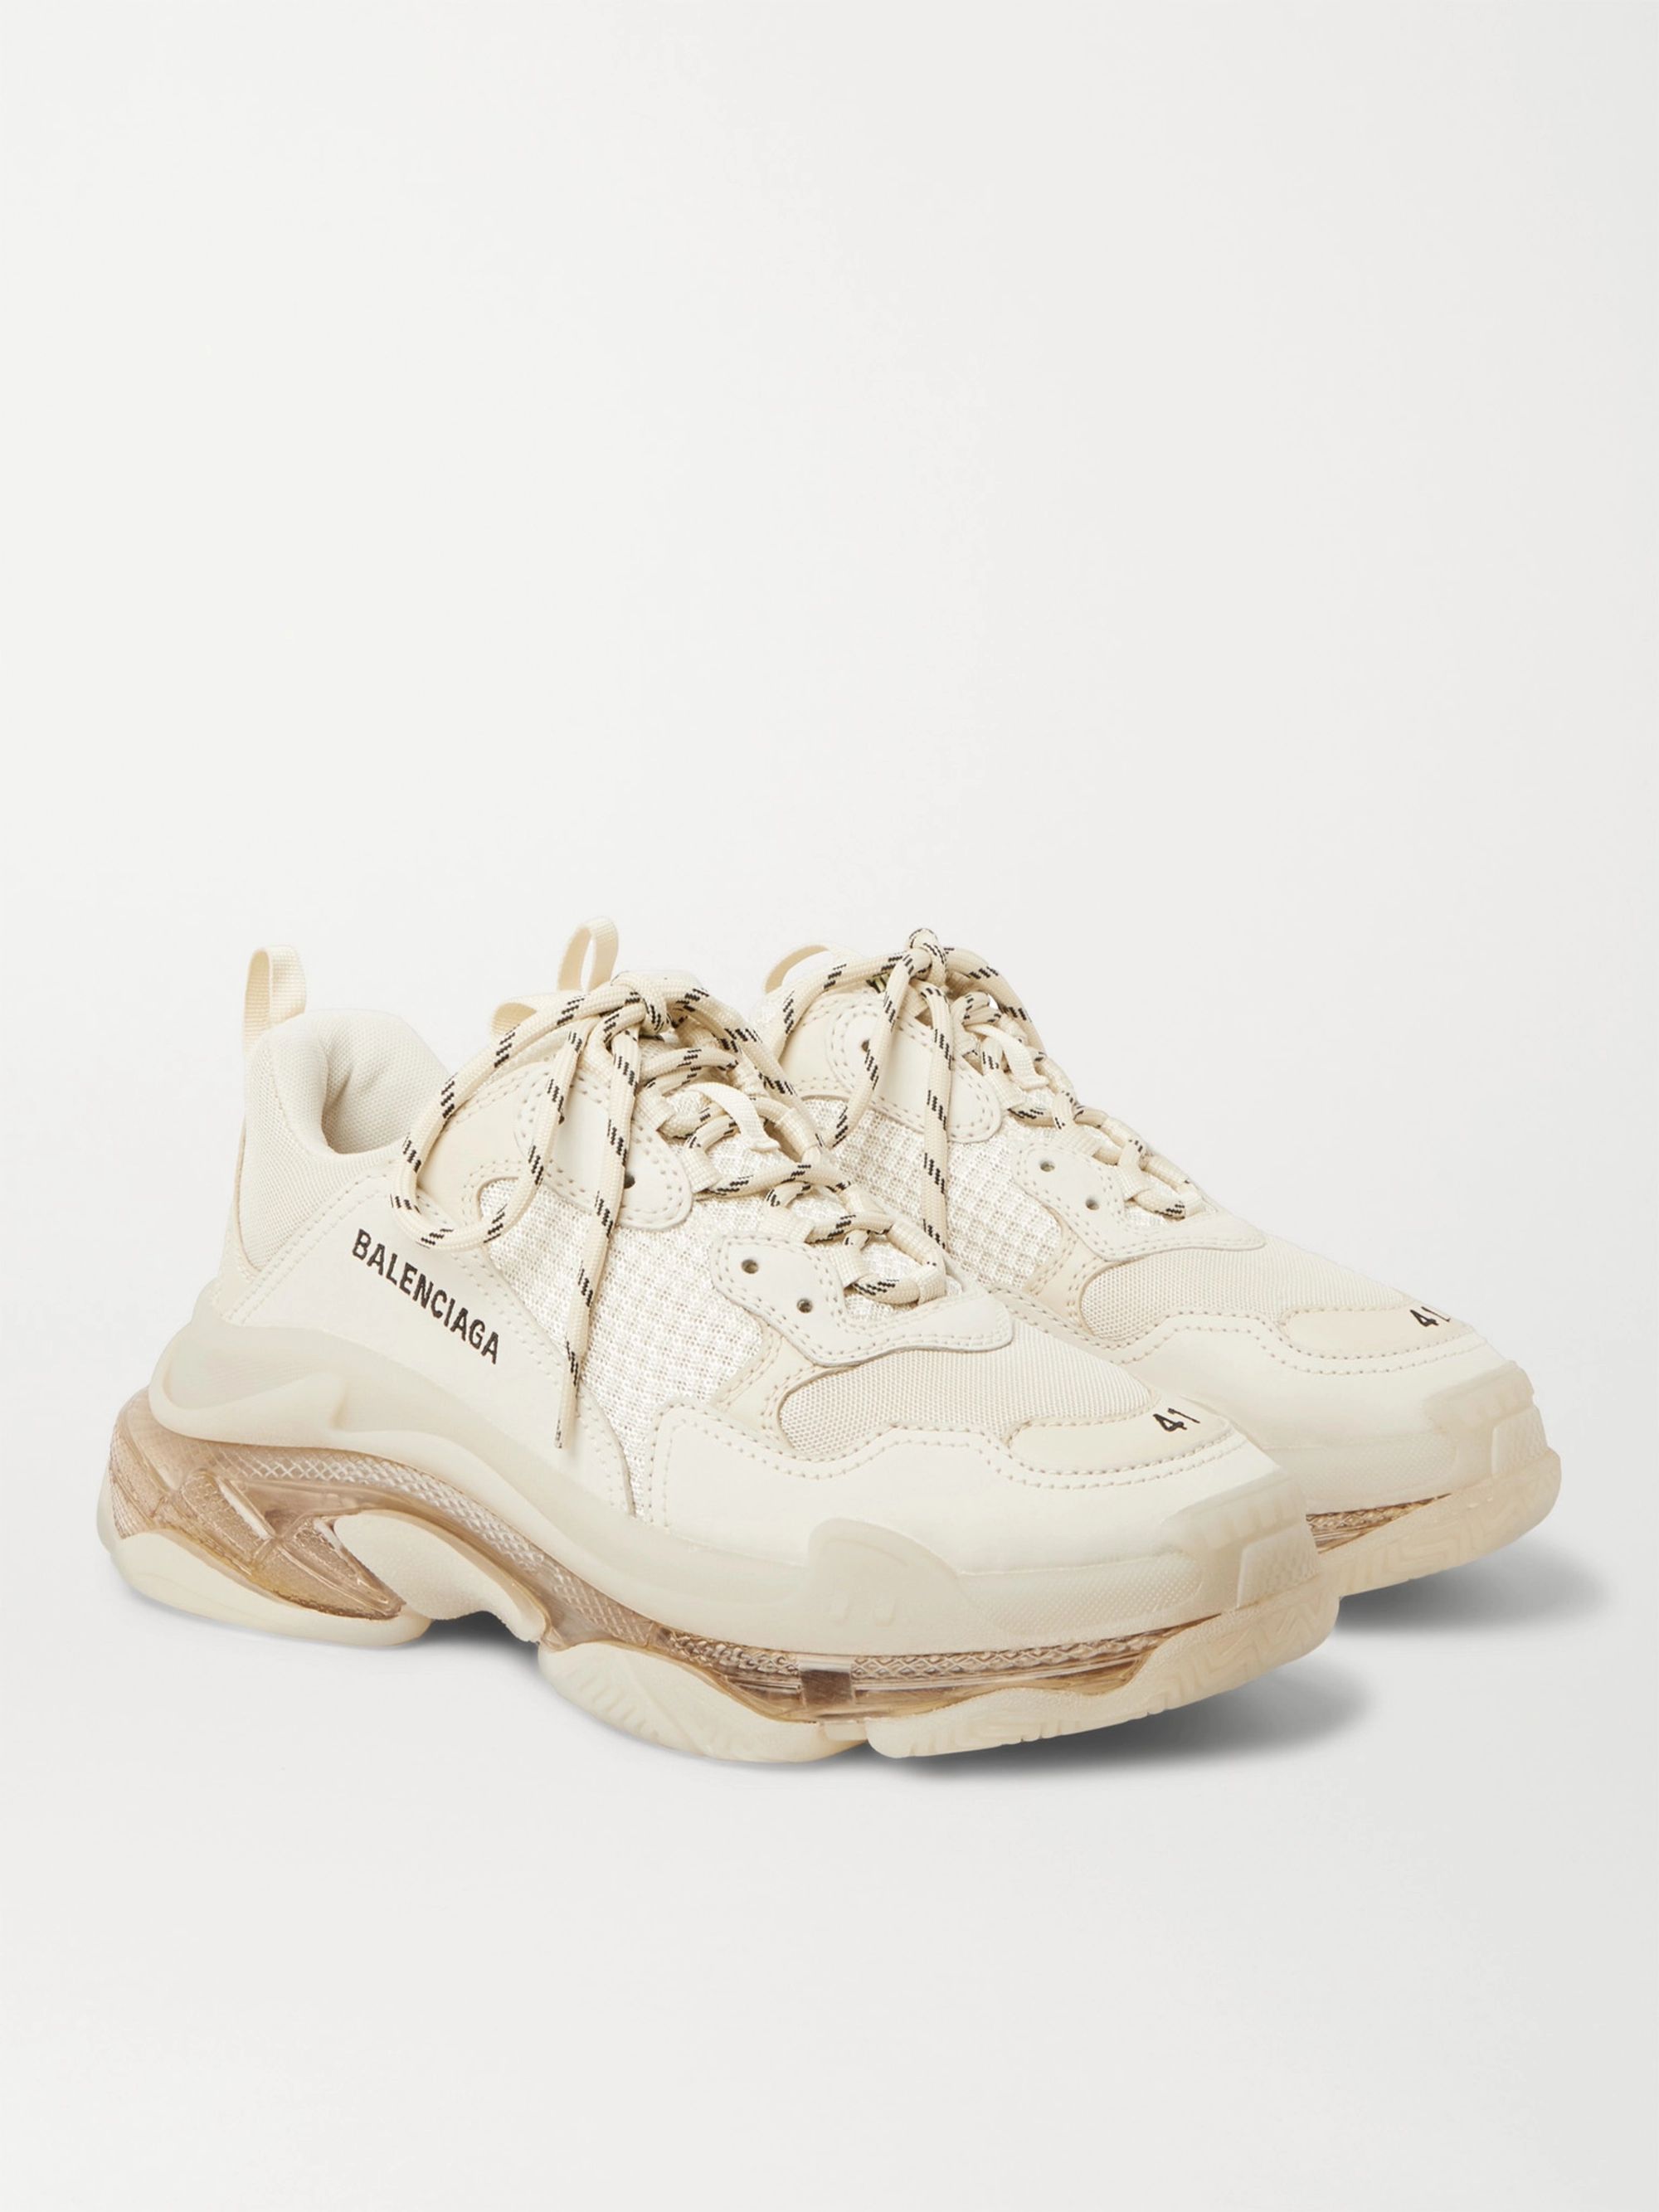 Balenciaga Triple S Leather And Mesh Trainers in White Lyst